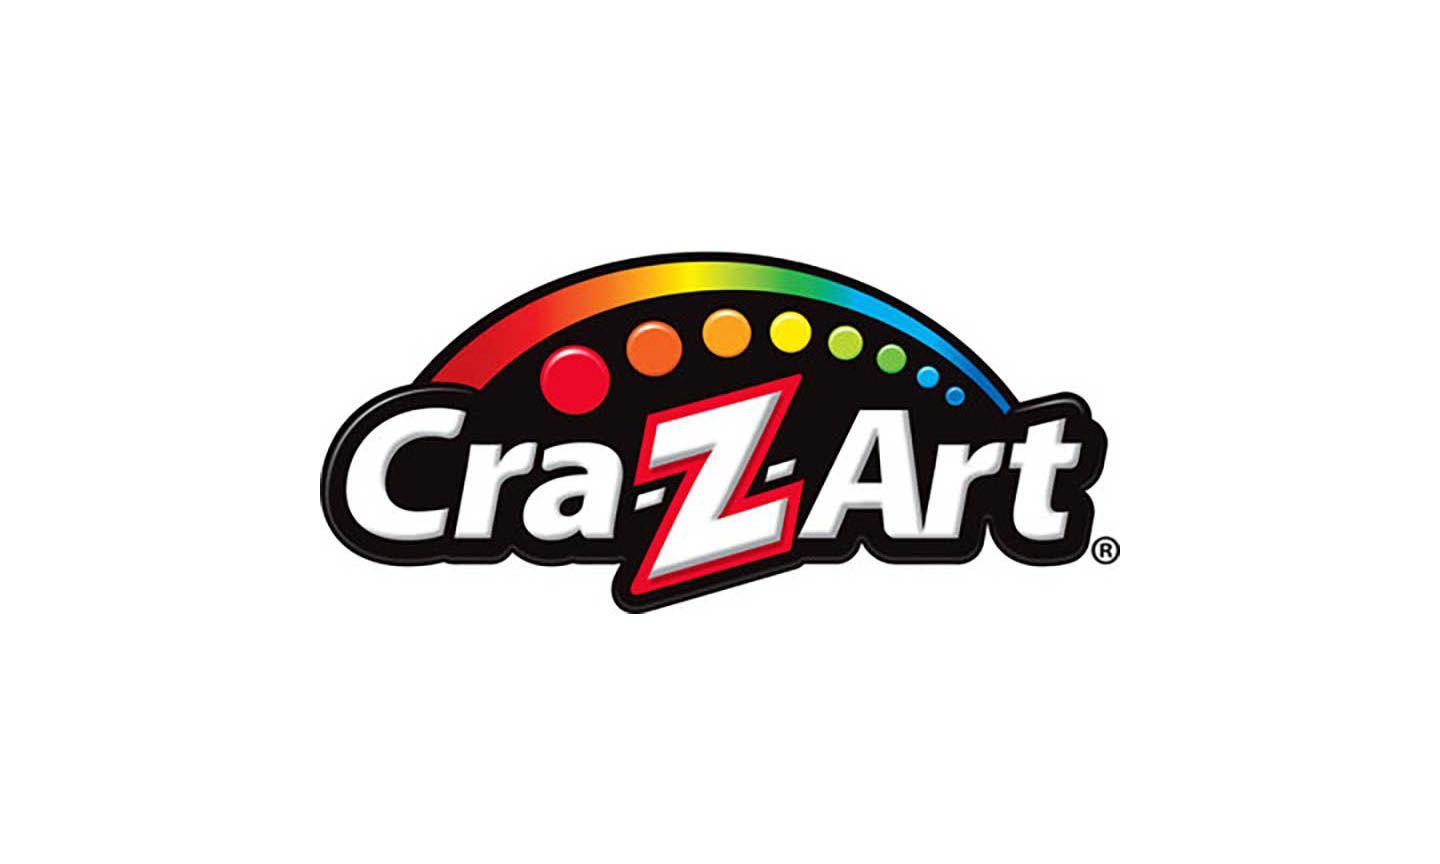 Cra-Z-Art Logo - Cra-Z-Art Donating $10K In Toys To Children's Charities For The Holidays